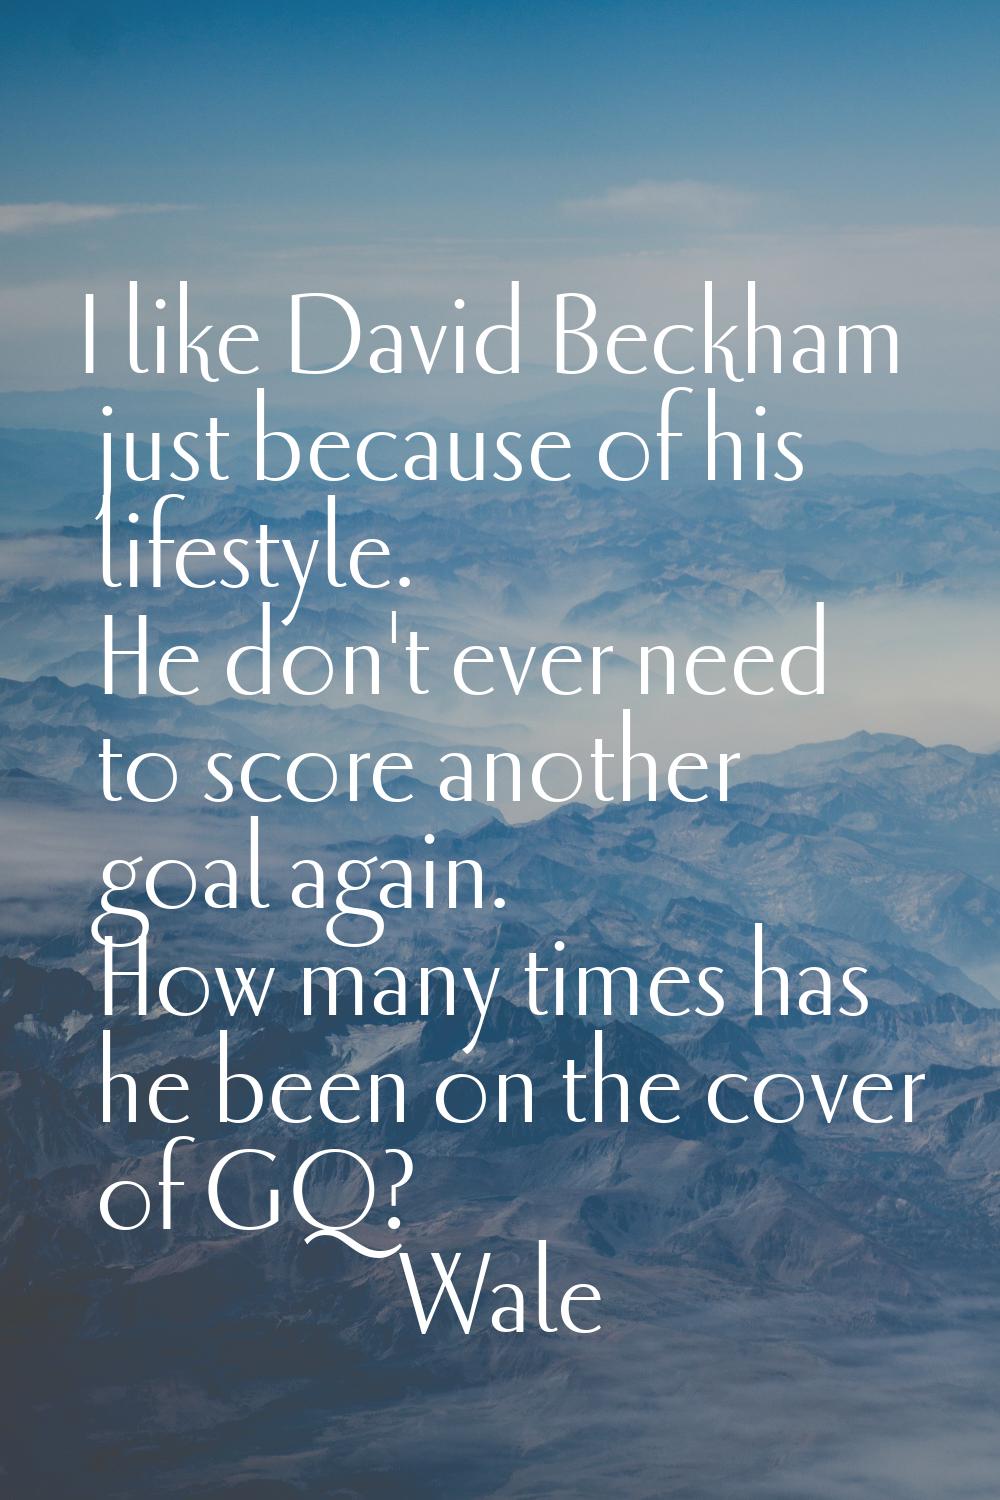 I like David Beckham just because of his lifestyle. He don't ever need to score another goal again.